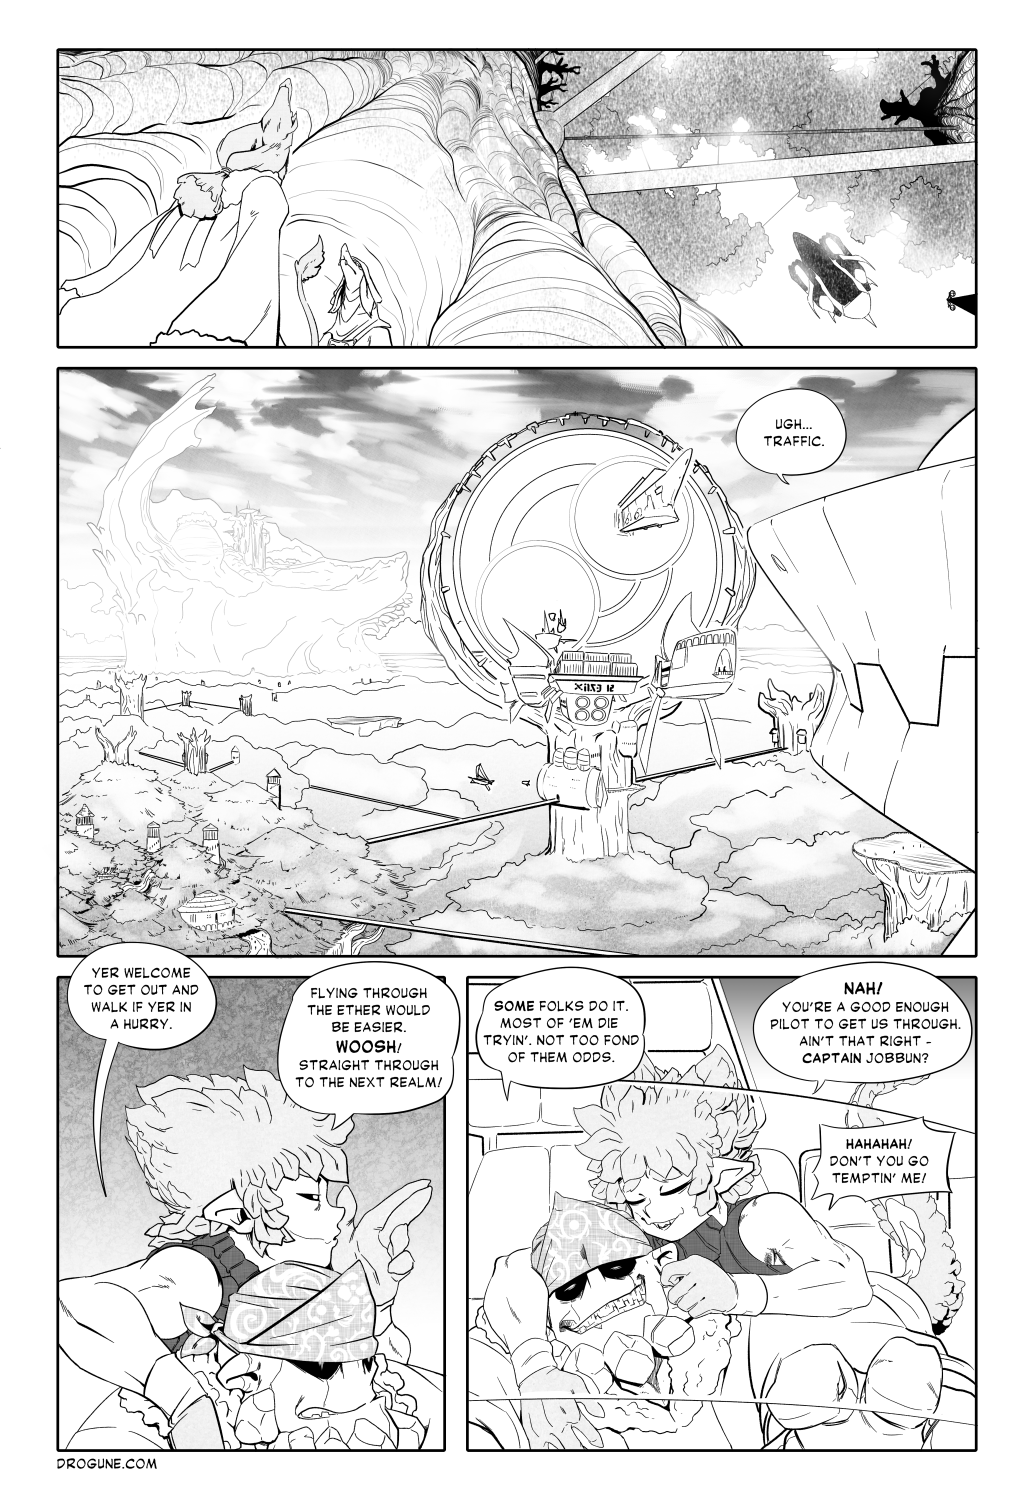 Book I • Page 29